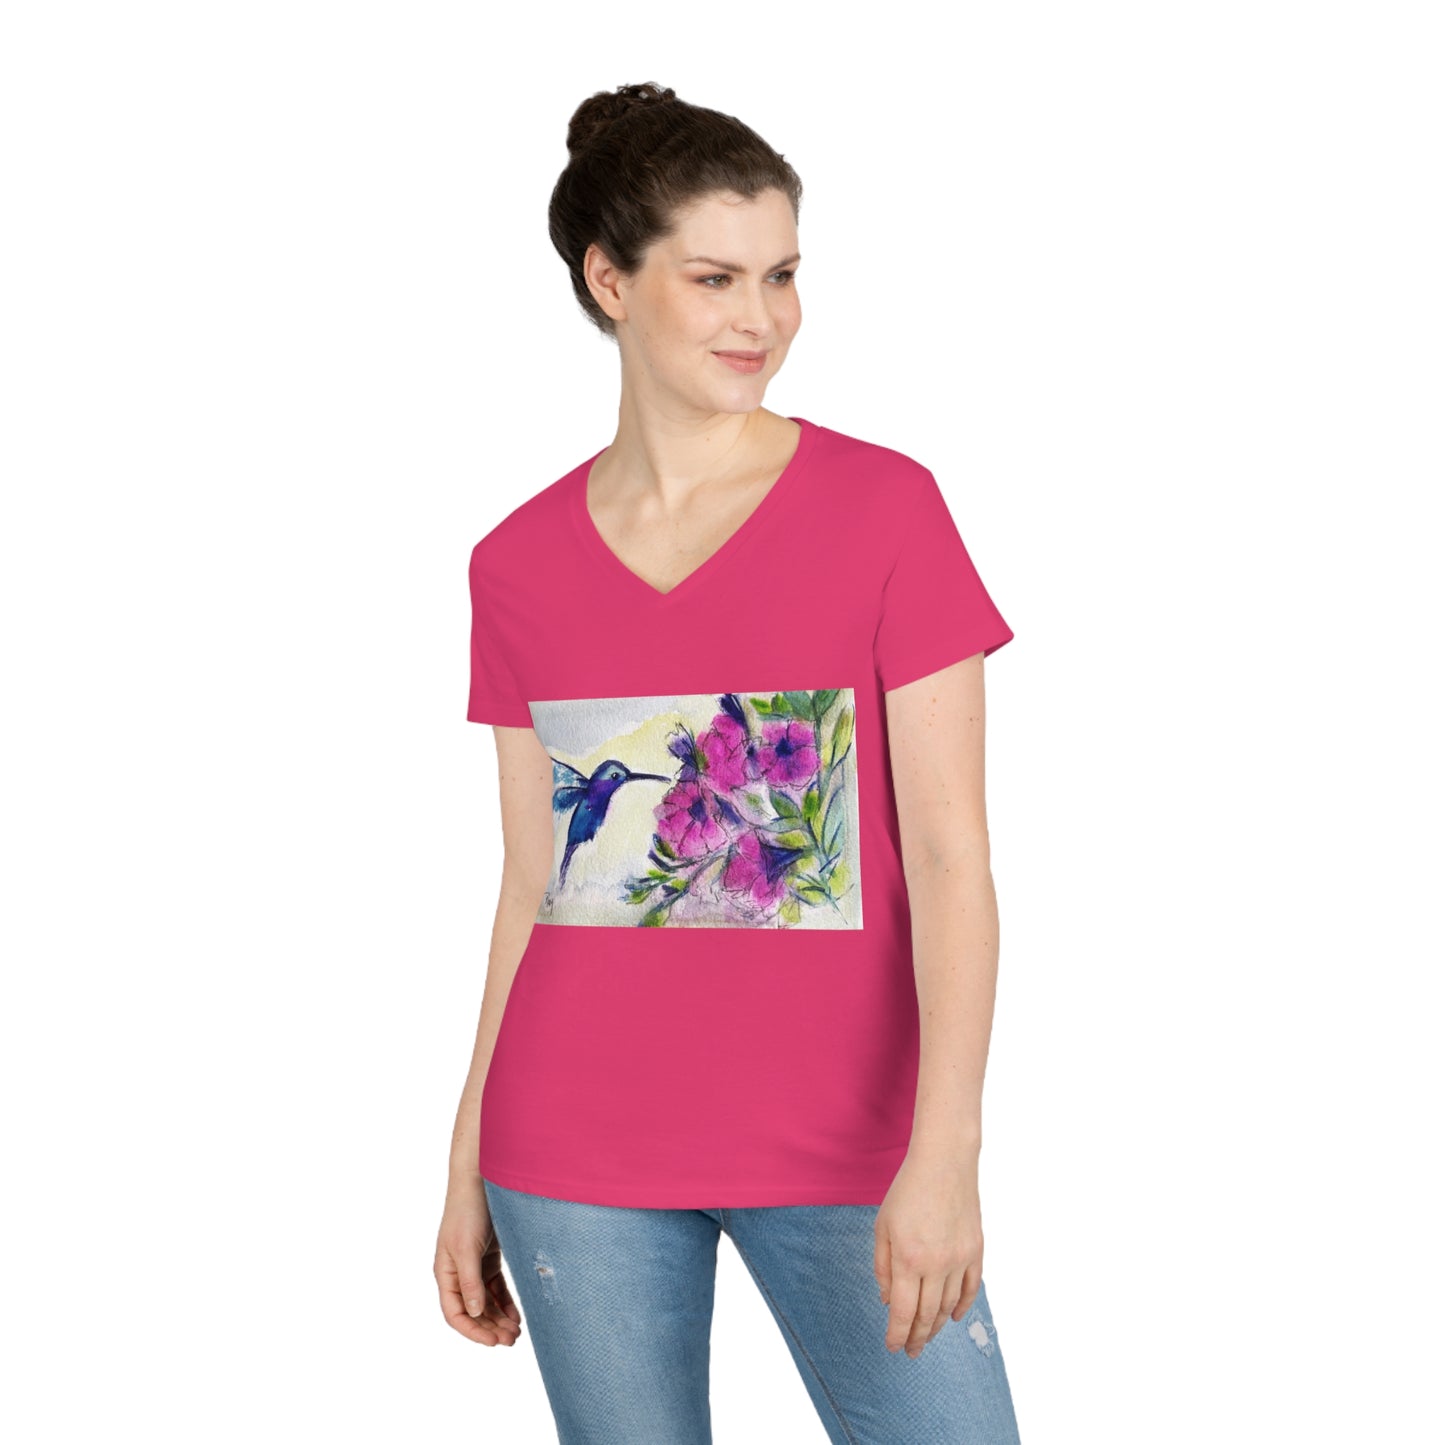 Hummingbird with Pink Tube Flowers Ladies' V-Neck T-Shirt